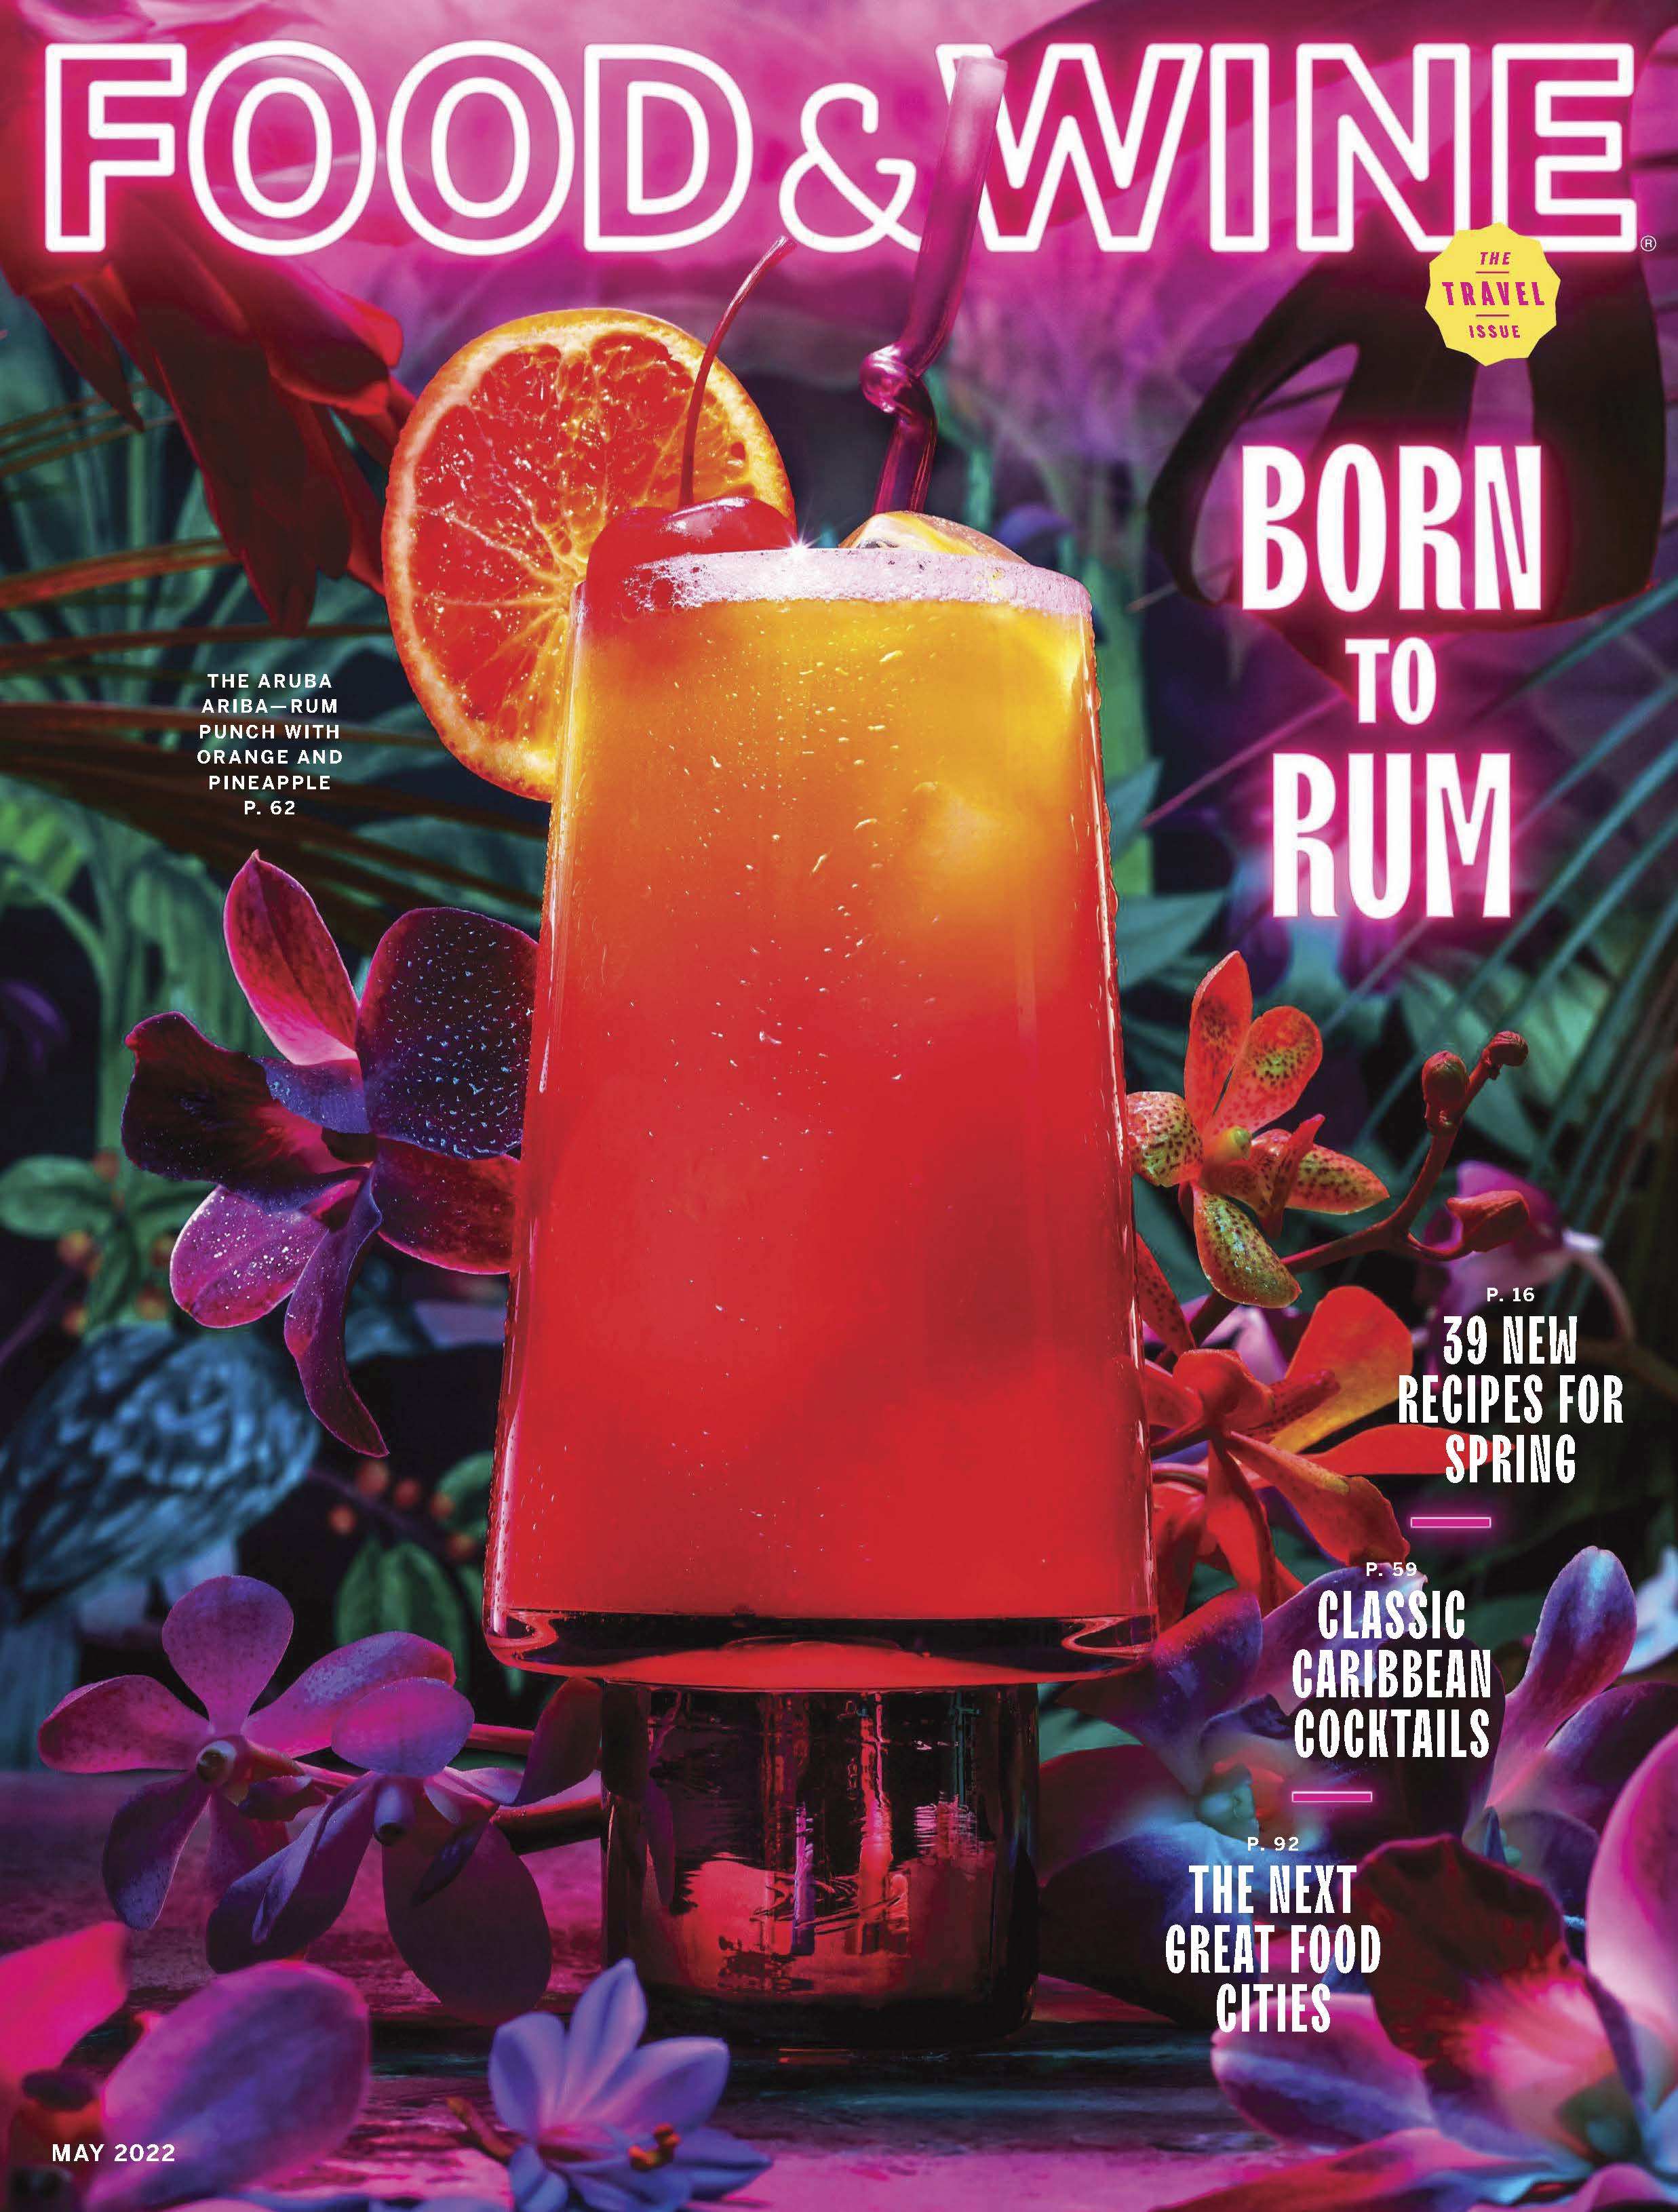 Food & Wine - “Born to Rum” May 2022